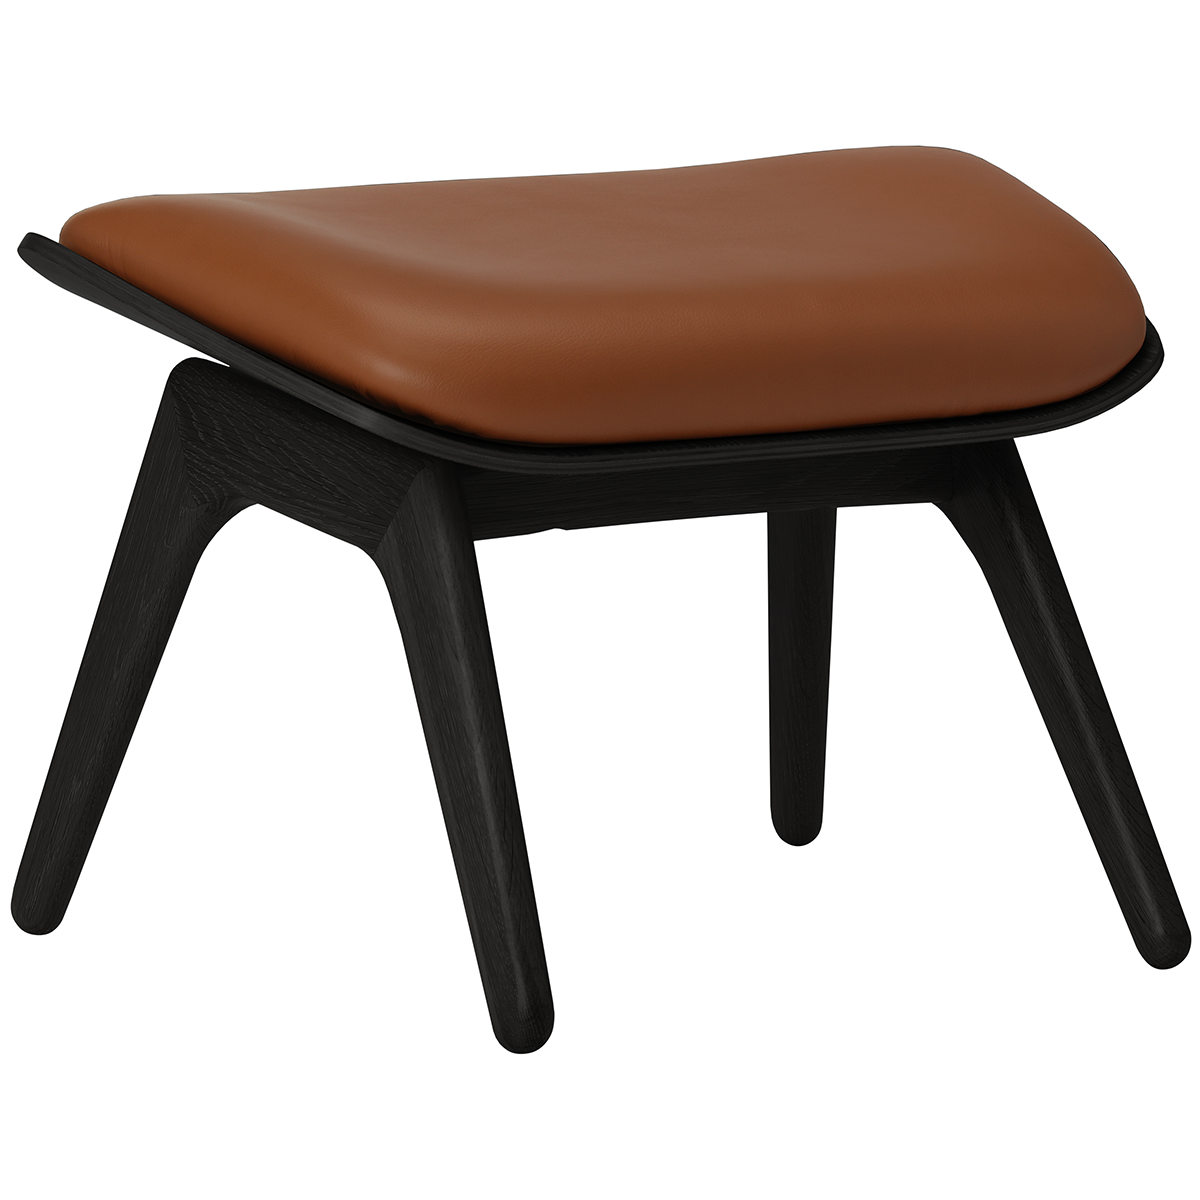 The Reader Leather Ottoman